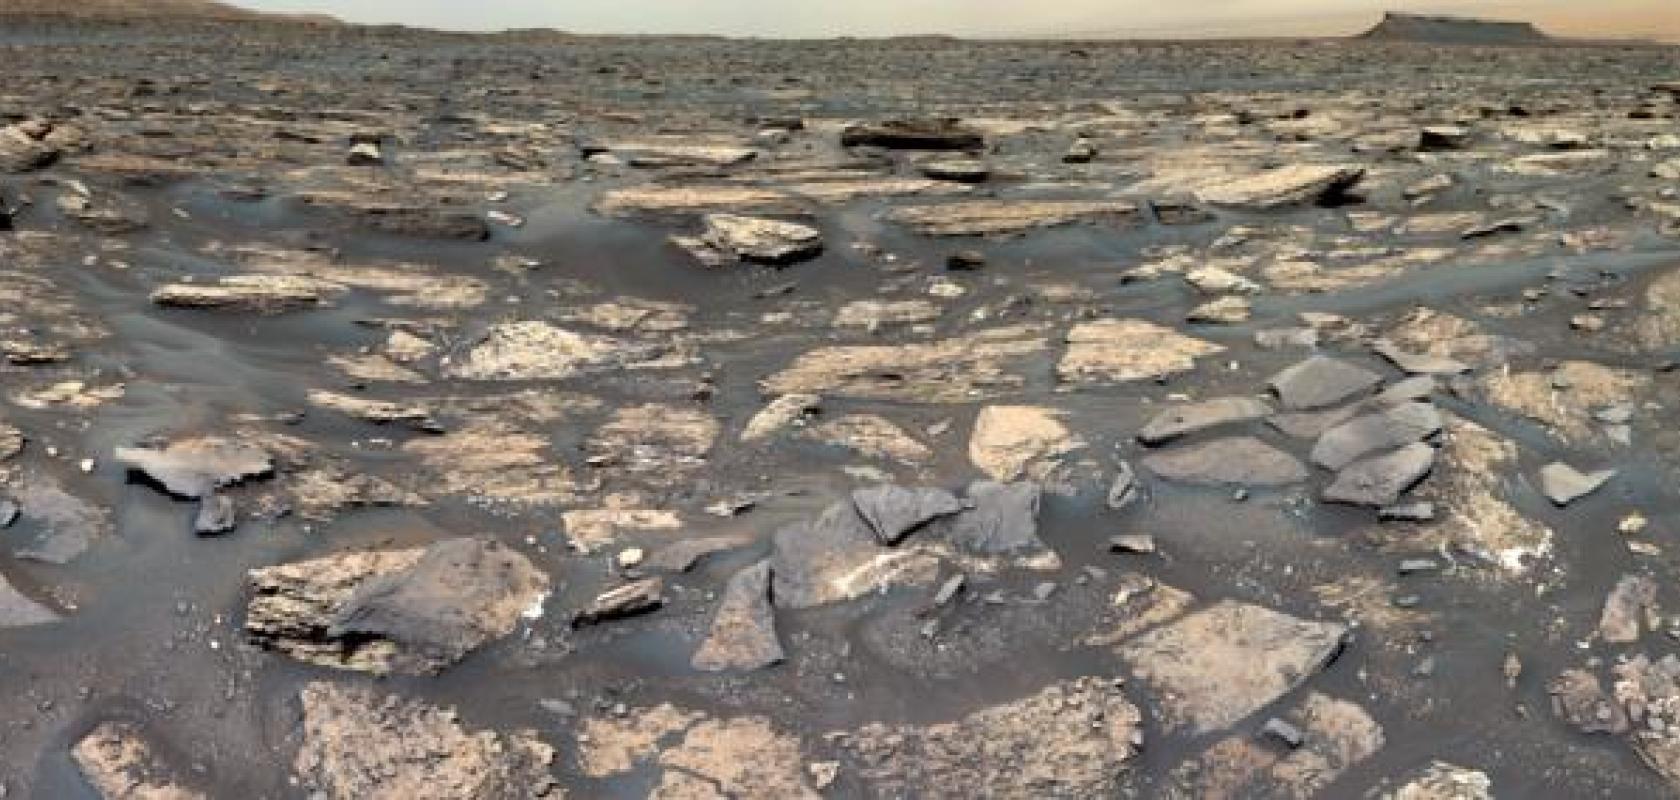 NASA’s Curiosity Rover uses spectroscopy to find signs that Mars’ Gale Crater could have supported microbial life.